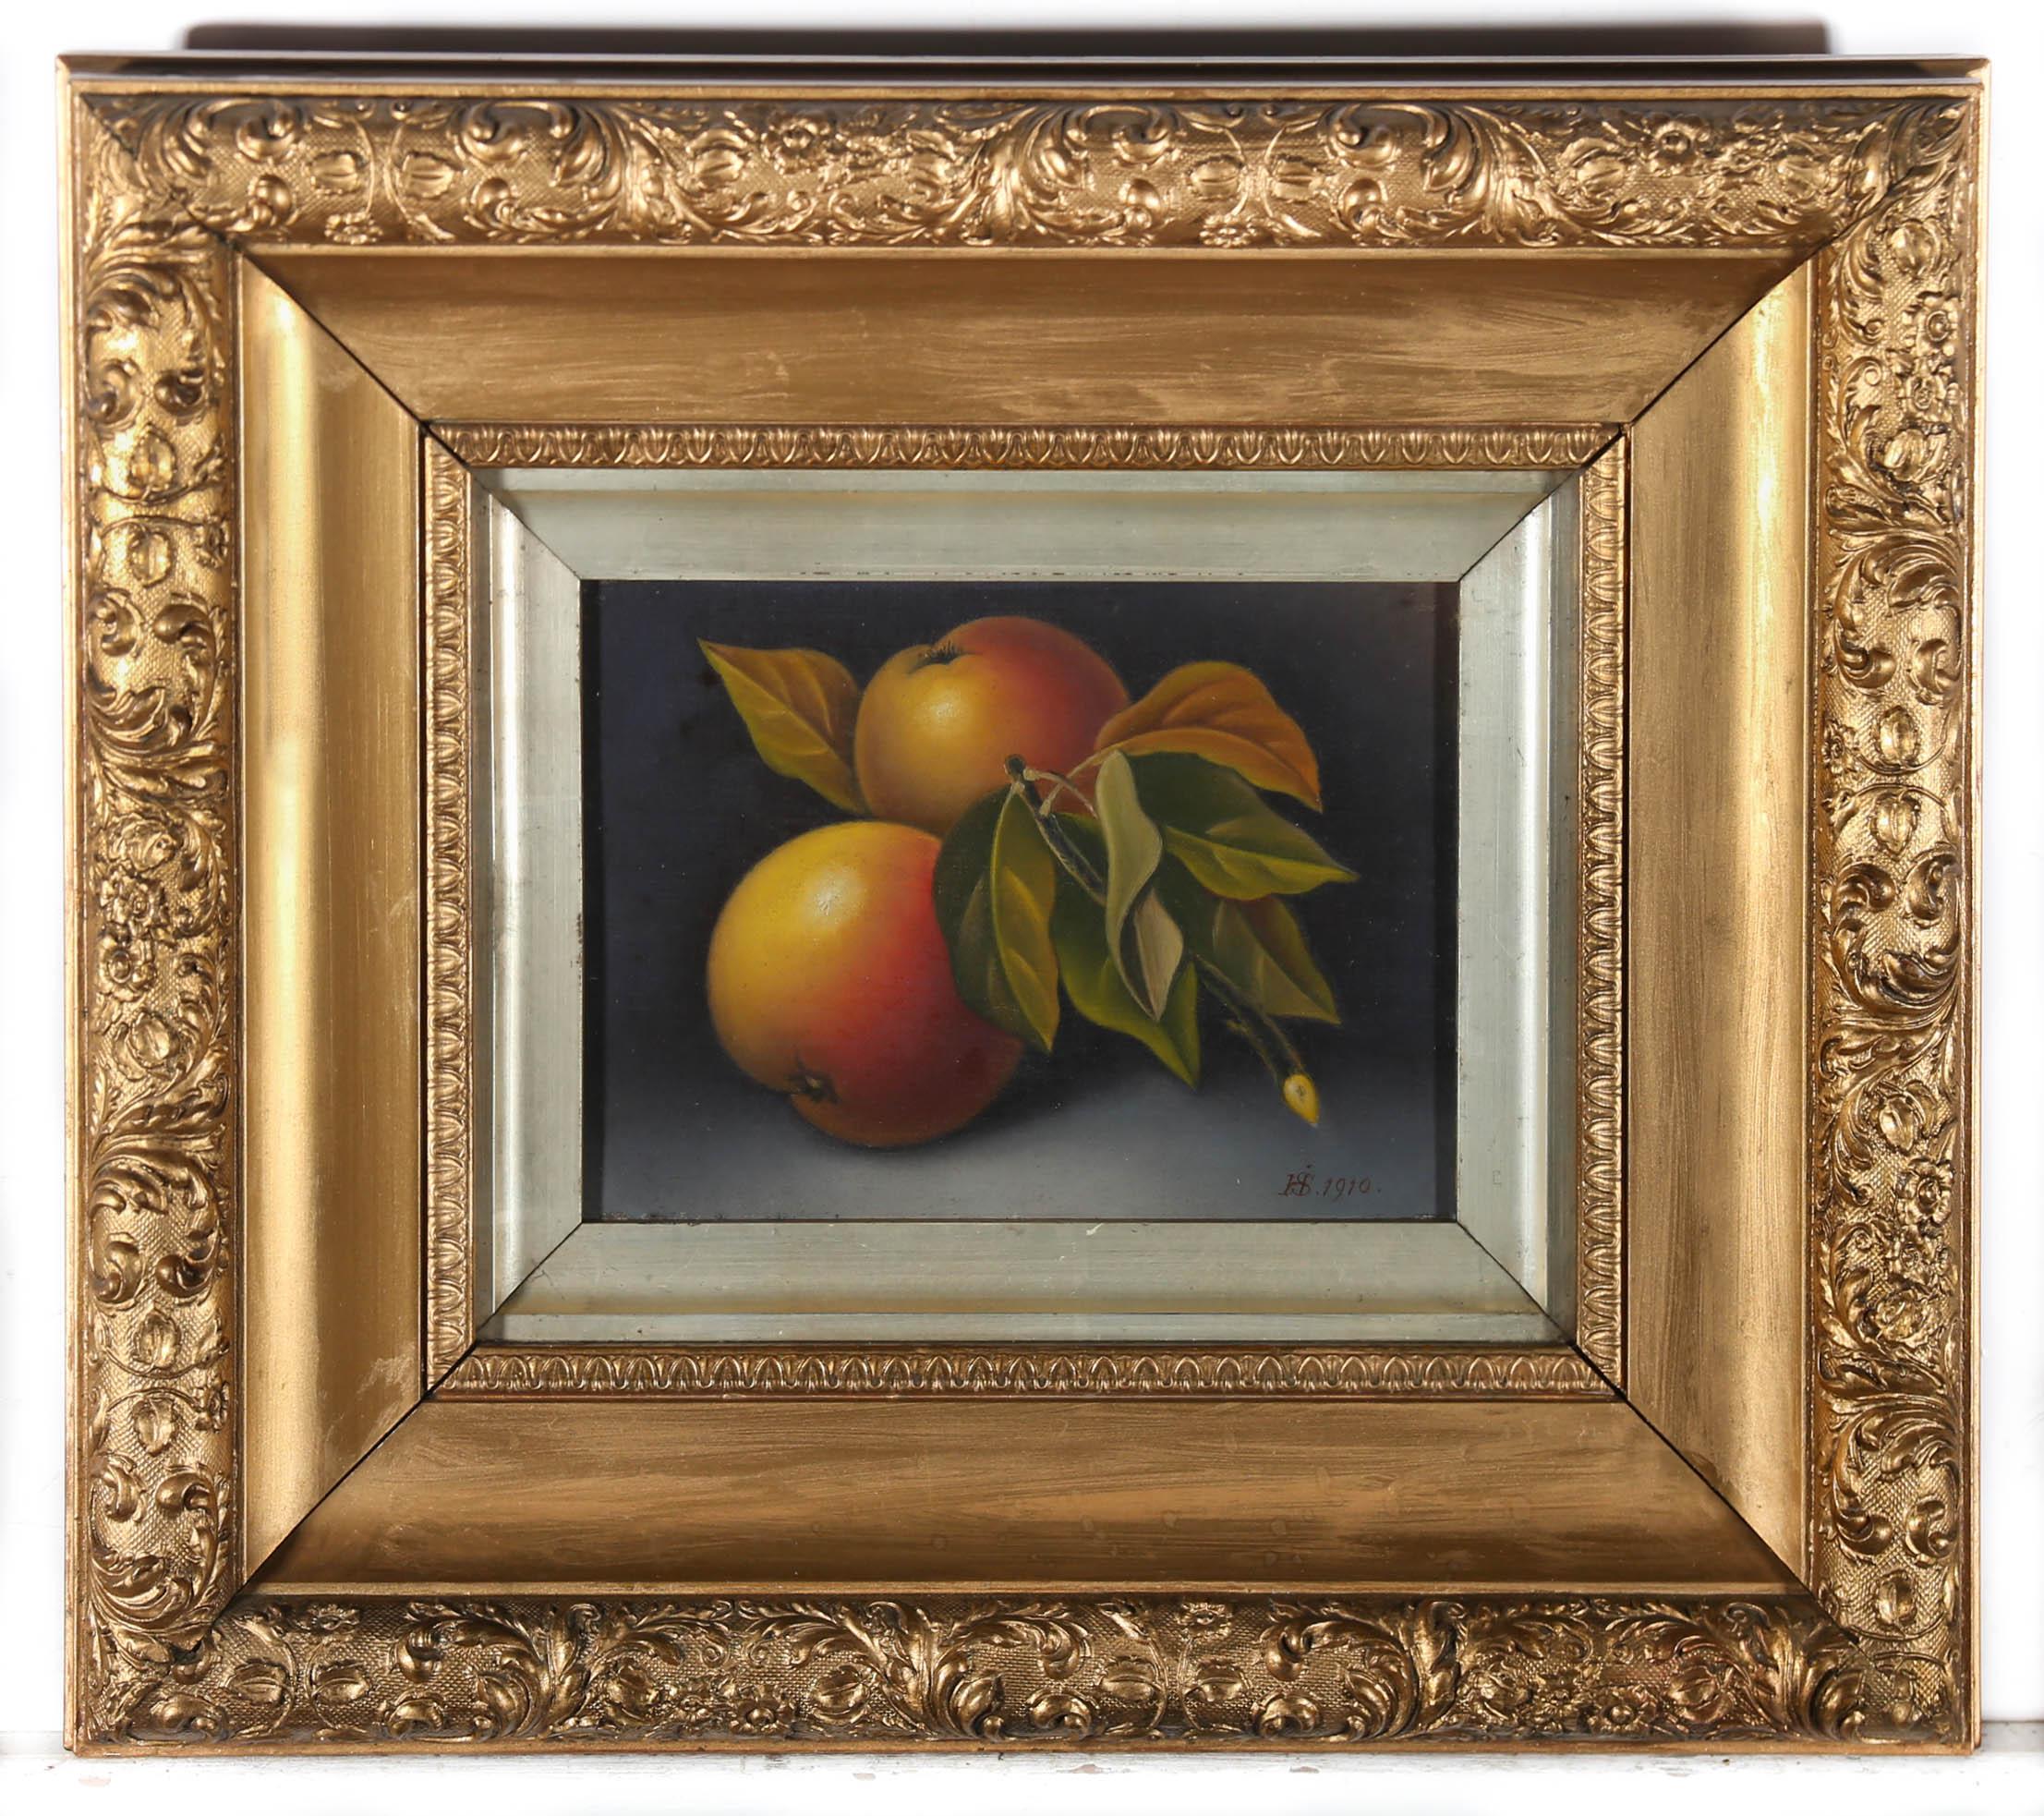 A charming still life study depicting two apples still attached to a sprig of leaves. Signed with monogram to the lower right and dated 1910. Well-presented in an ornate gilt slip and frame with scrolling acanthus and lambs tongue running pattern.